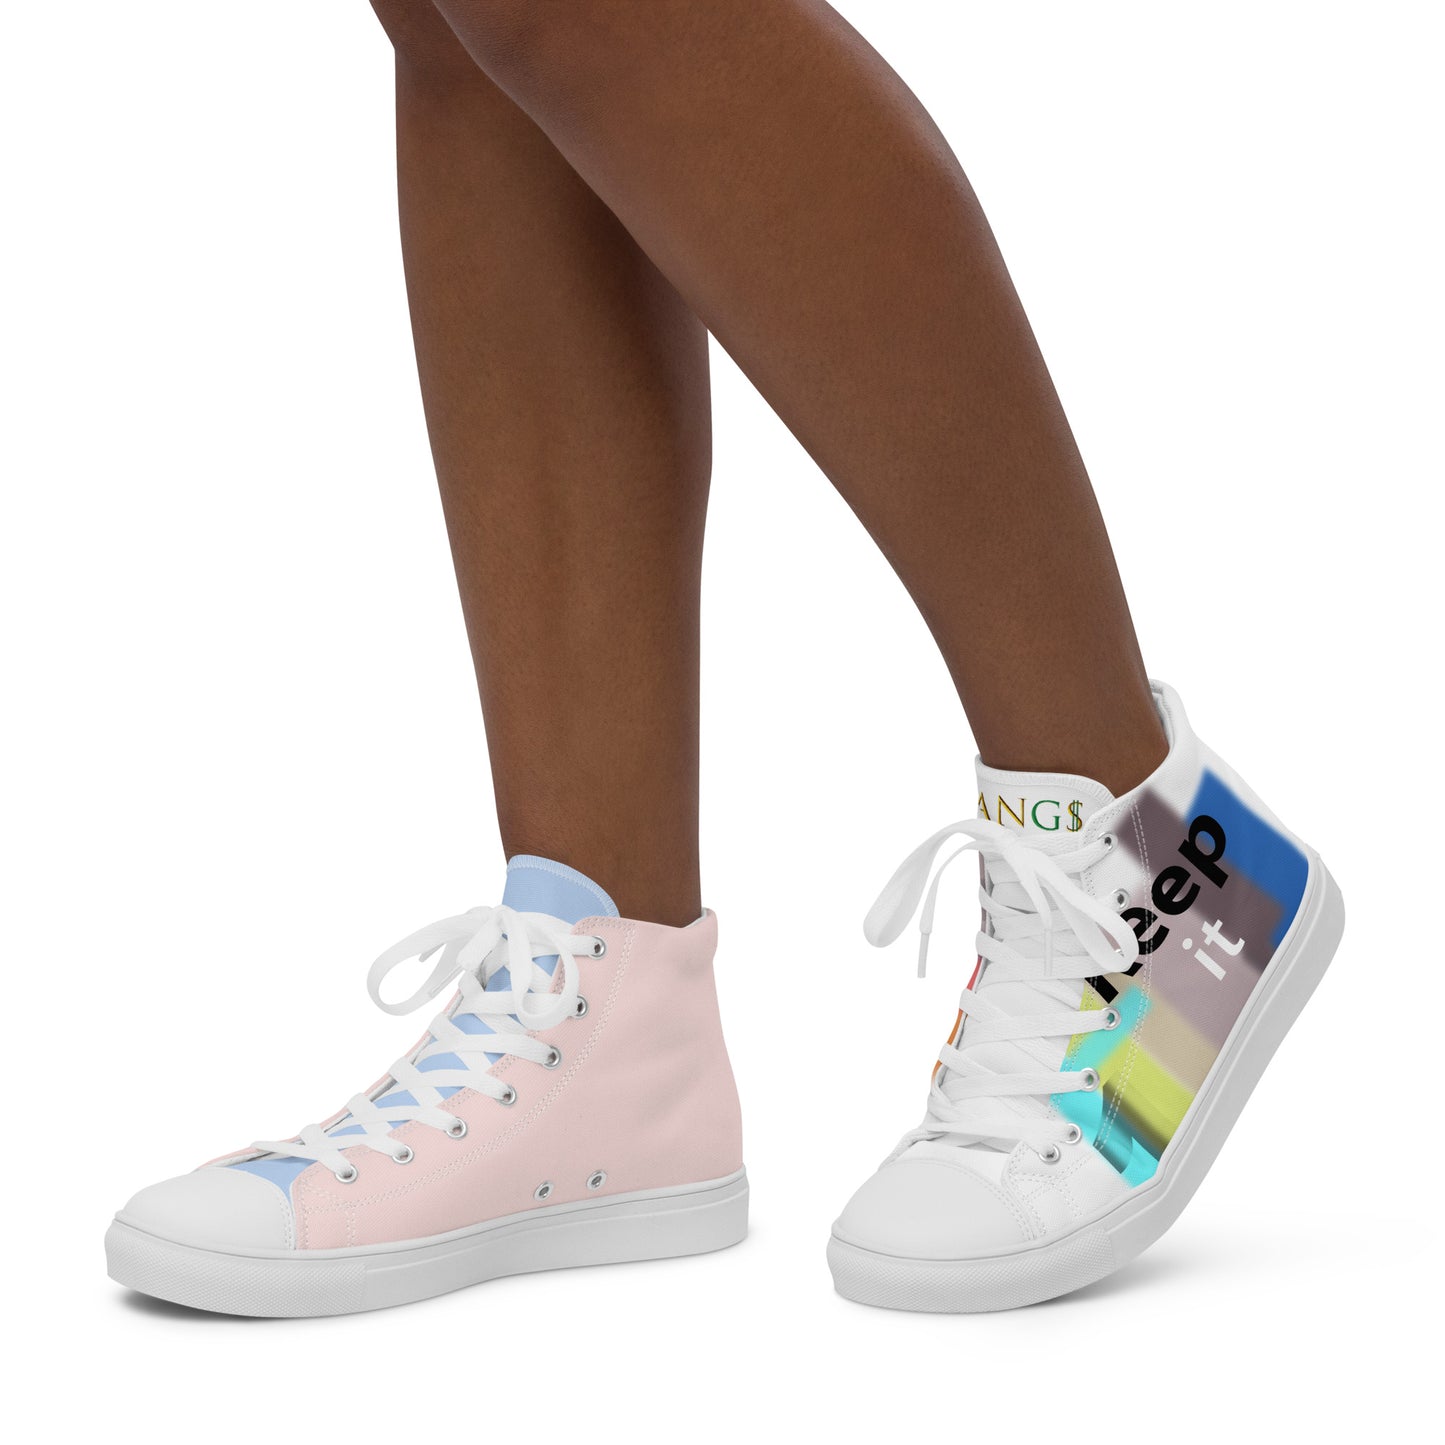 Keep it 100 Women’s high top canvas shoes